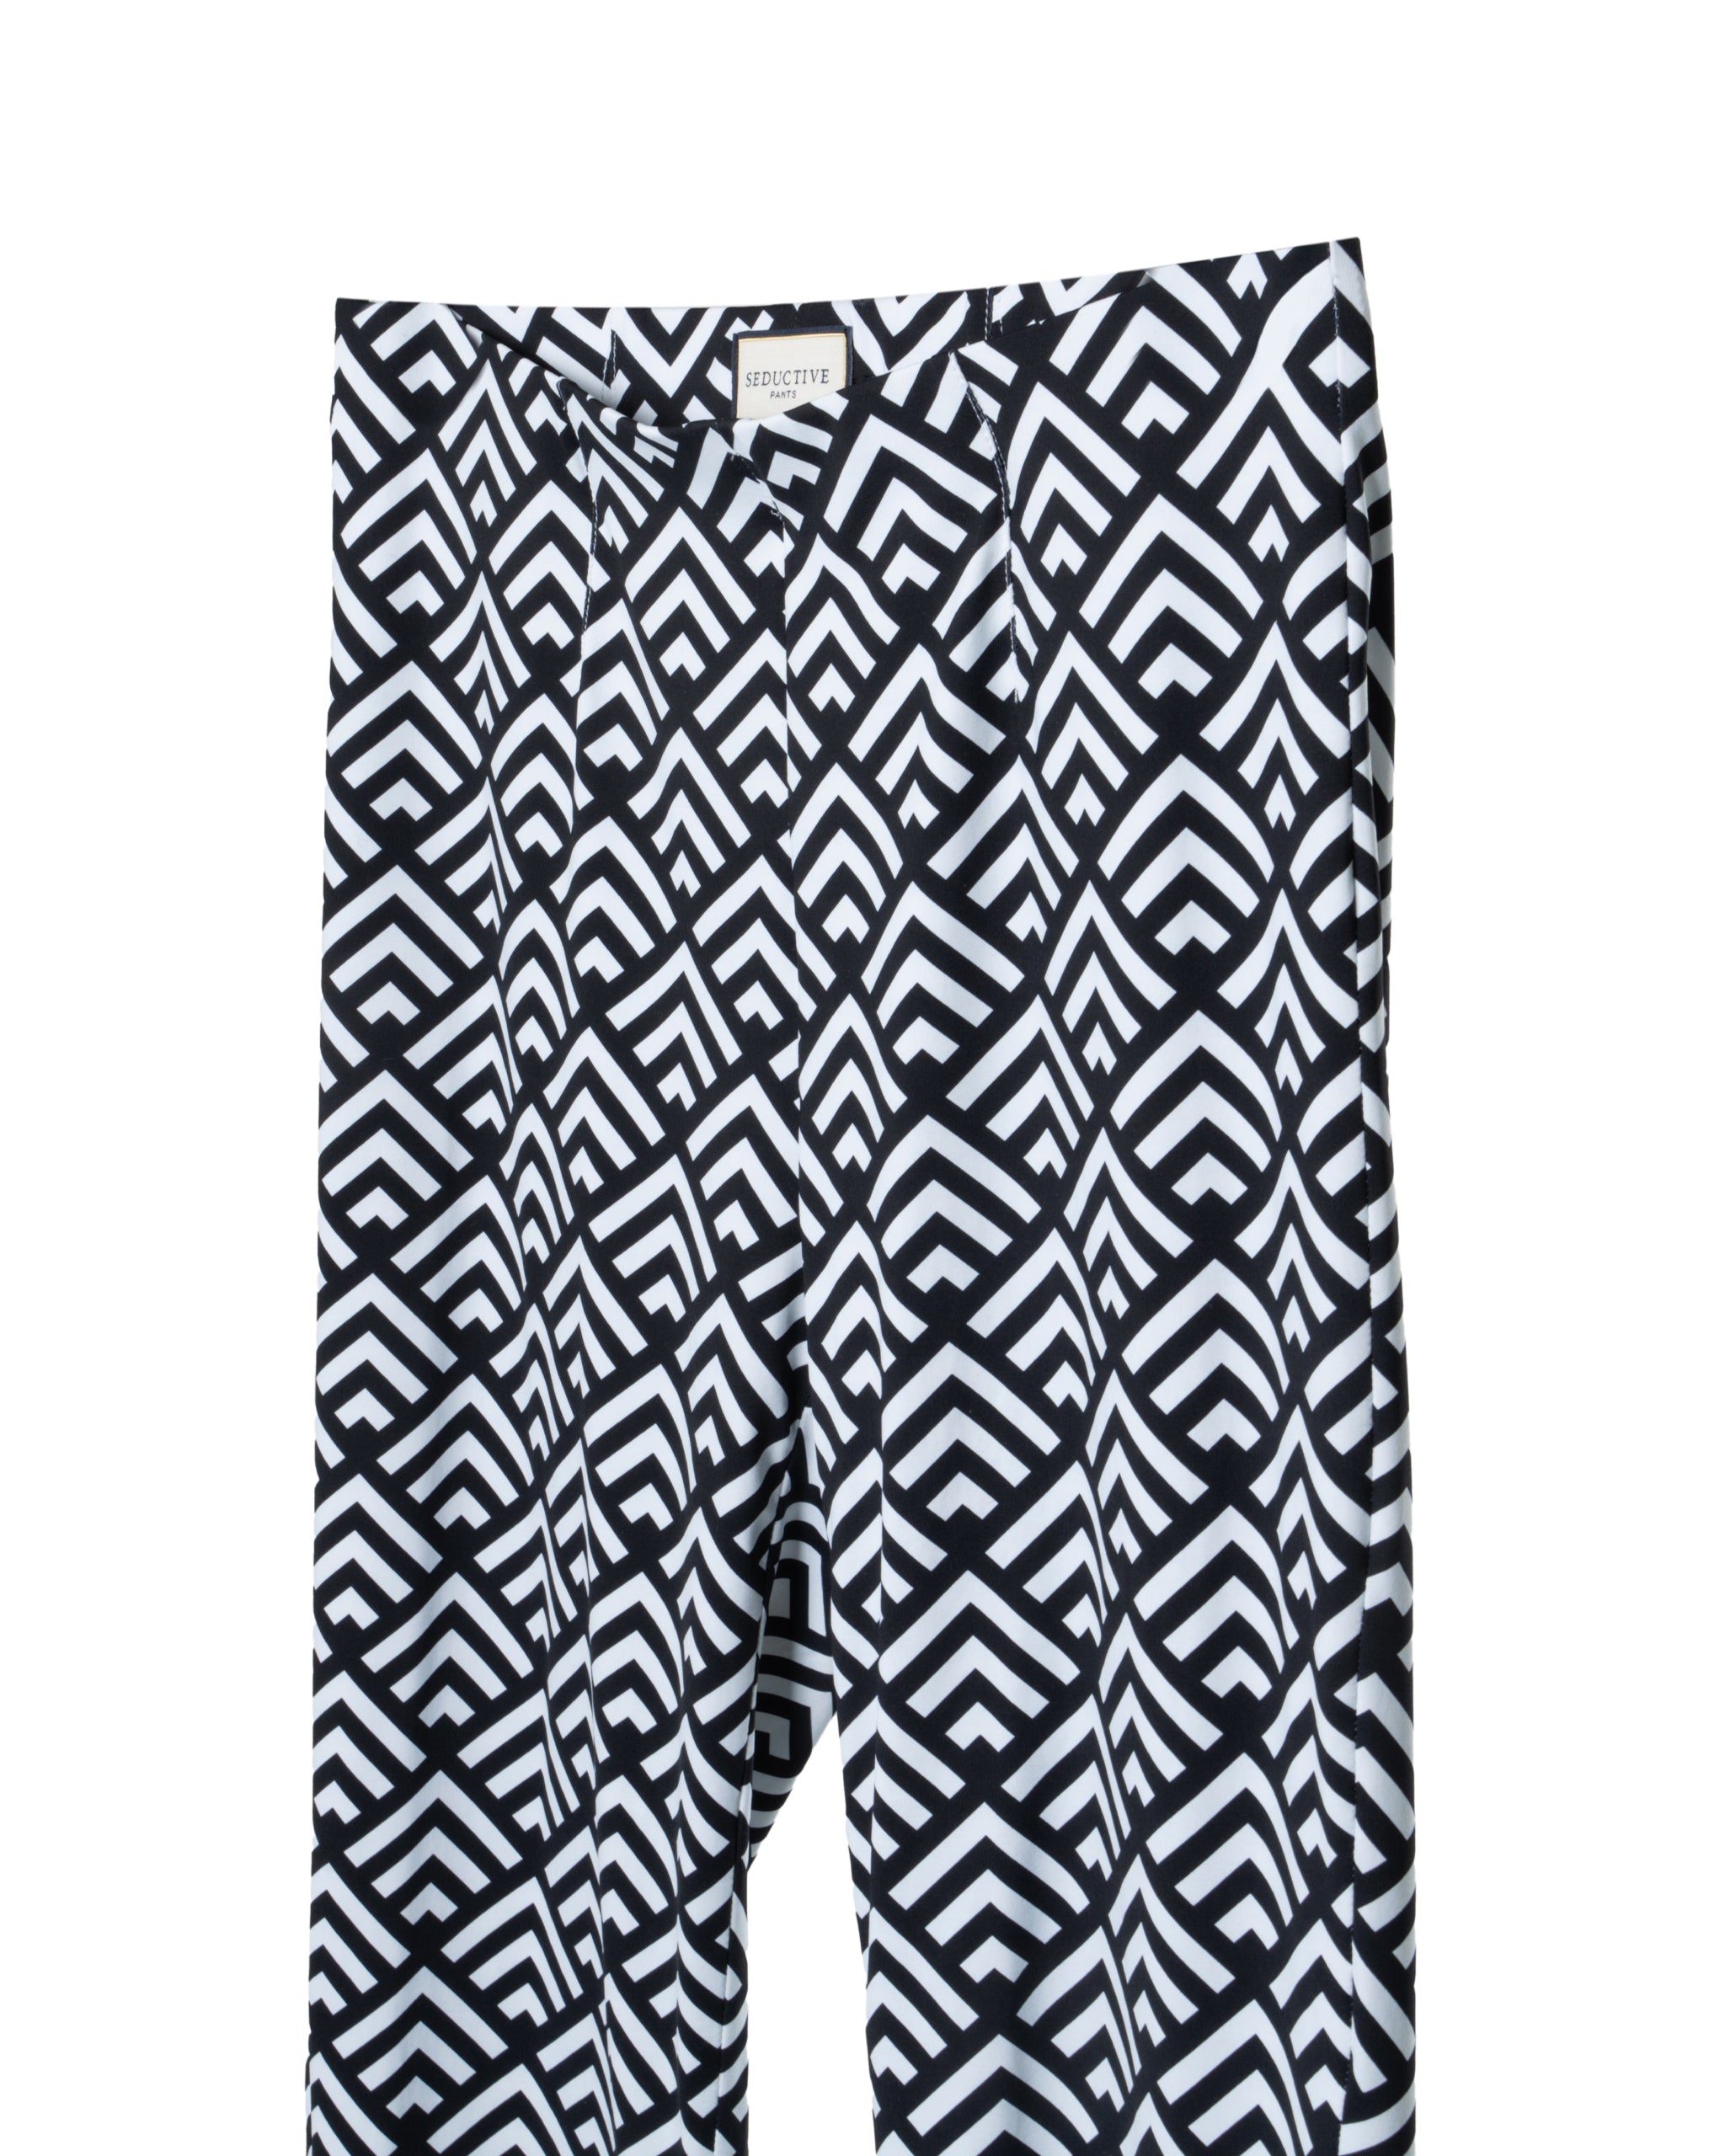 TRIANGLE PRINT SUPERSTRETCH PANTS